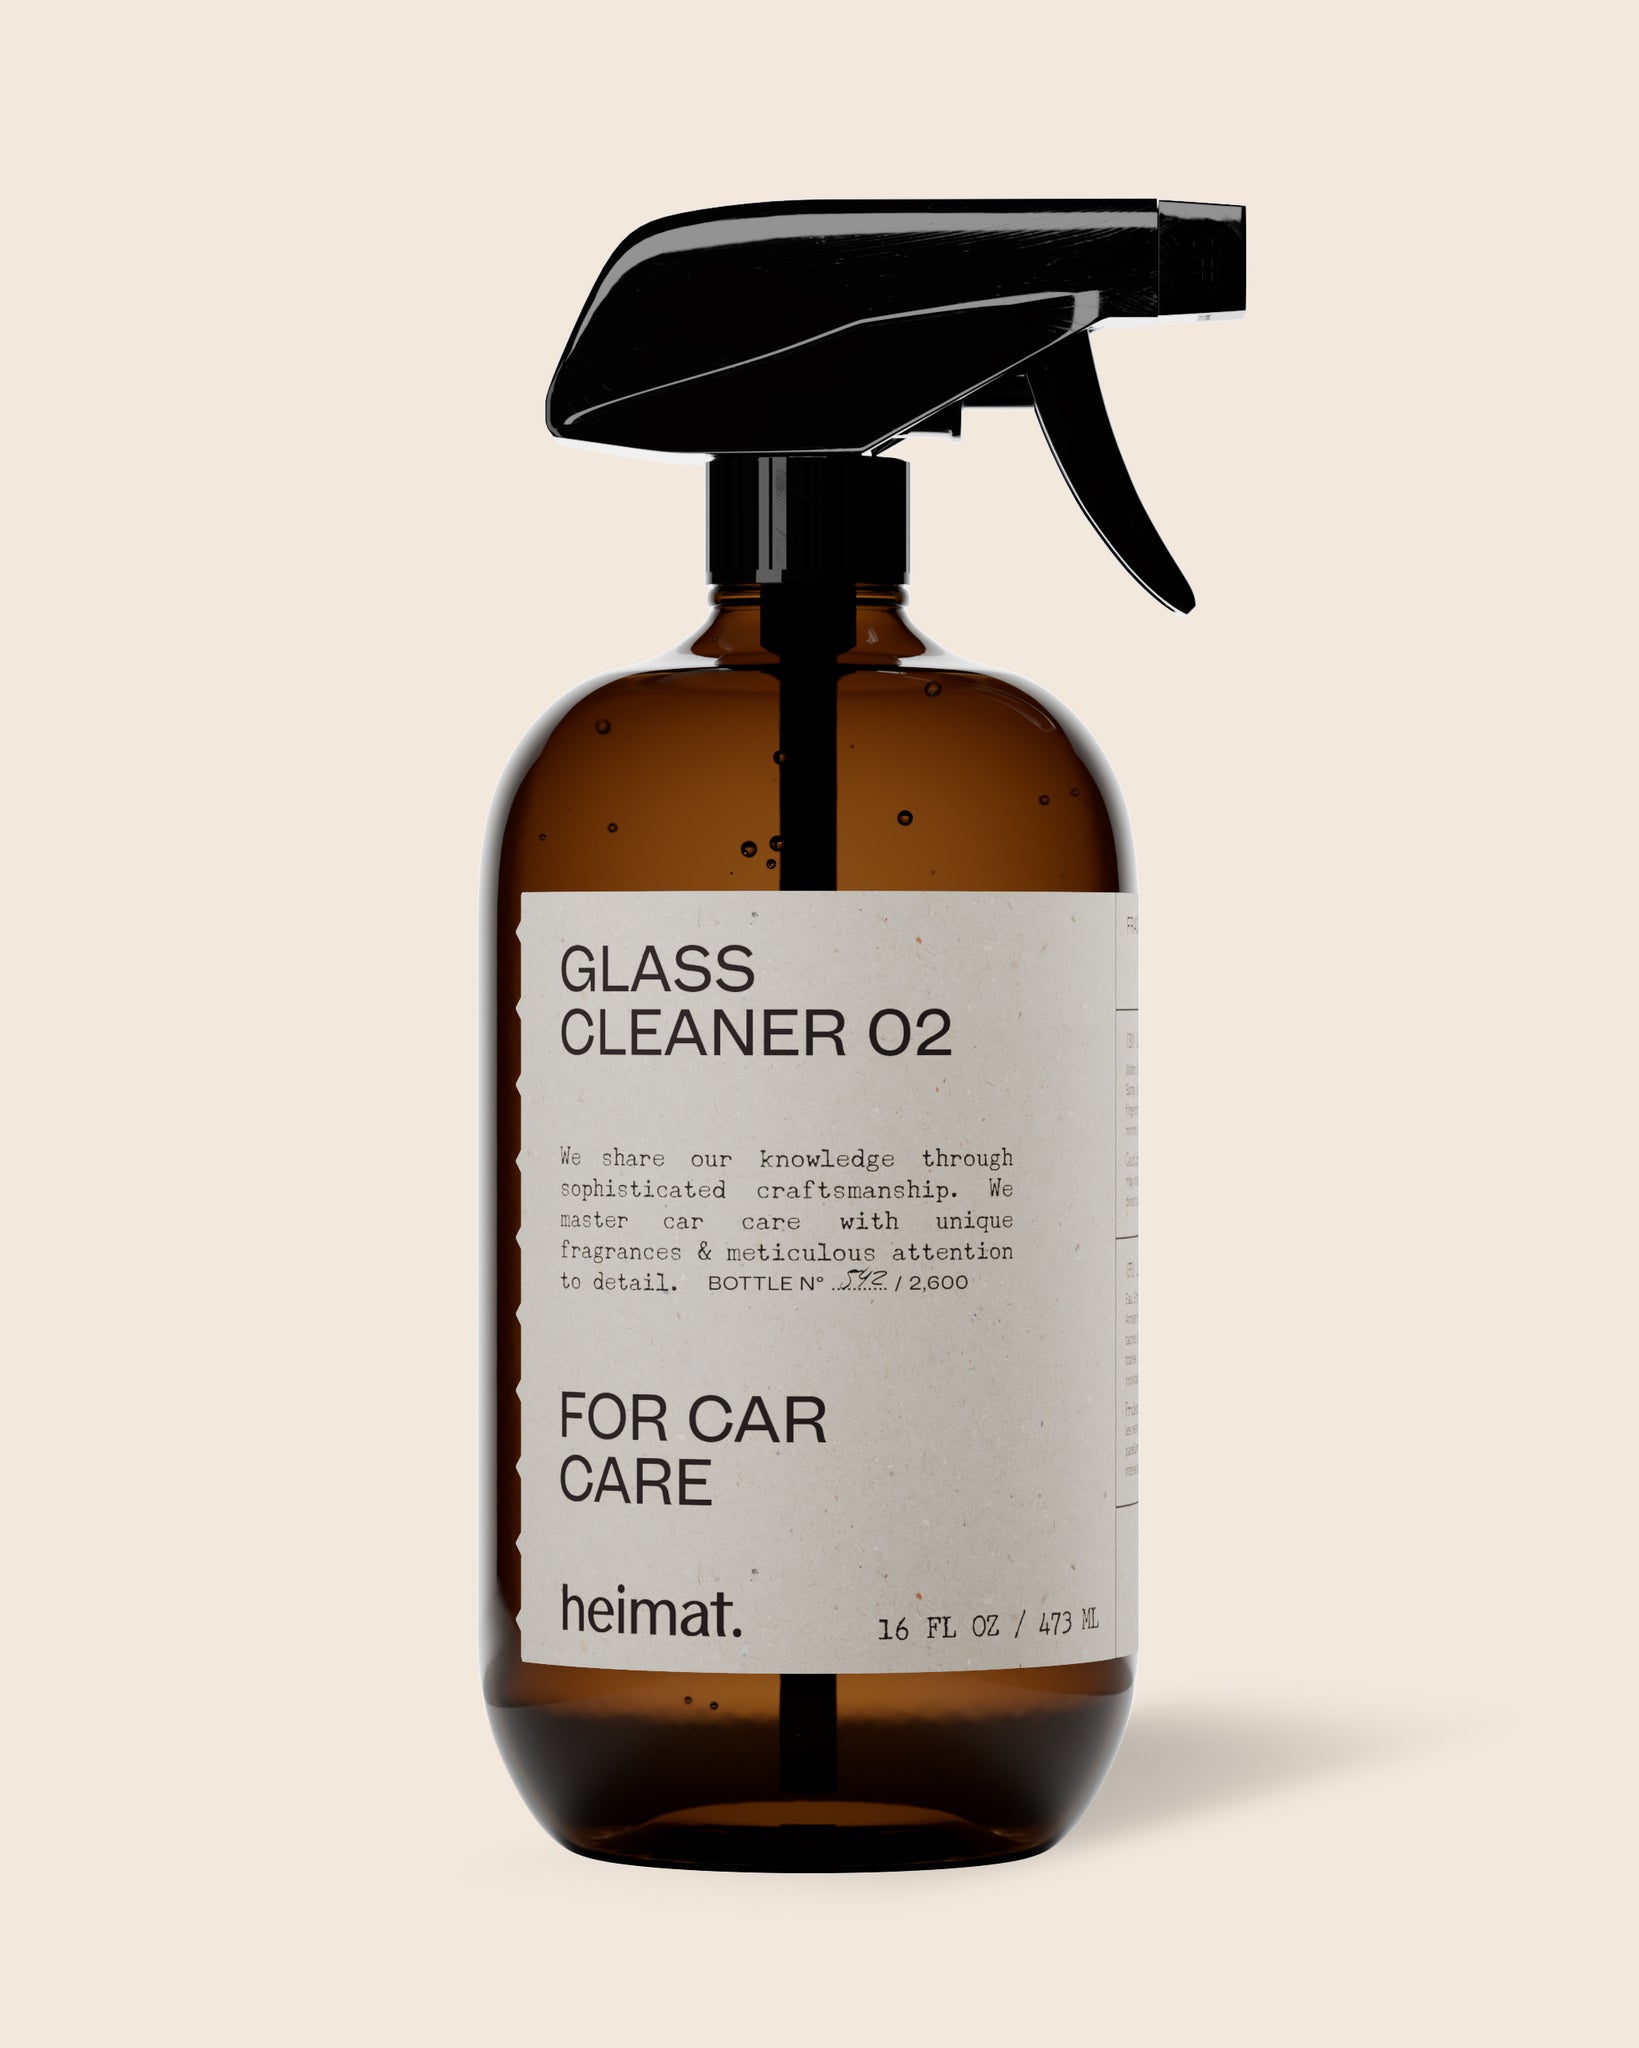 GLASS CLEANER 02